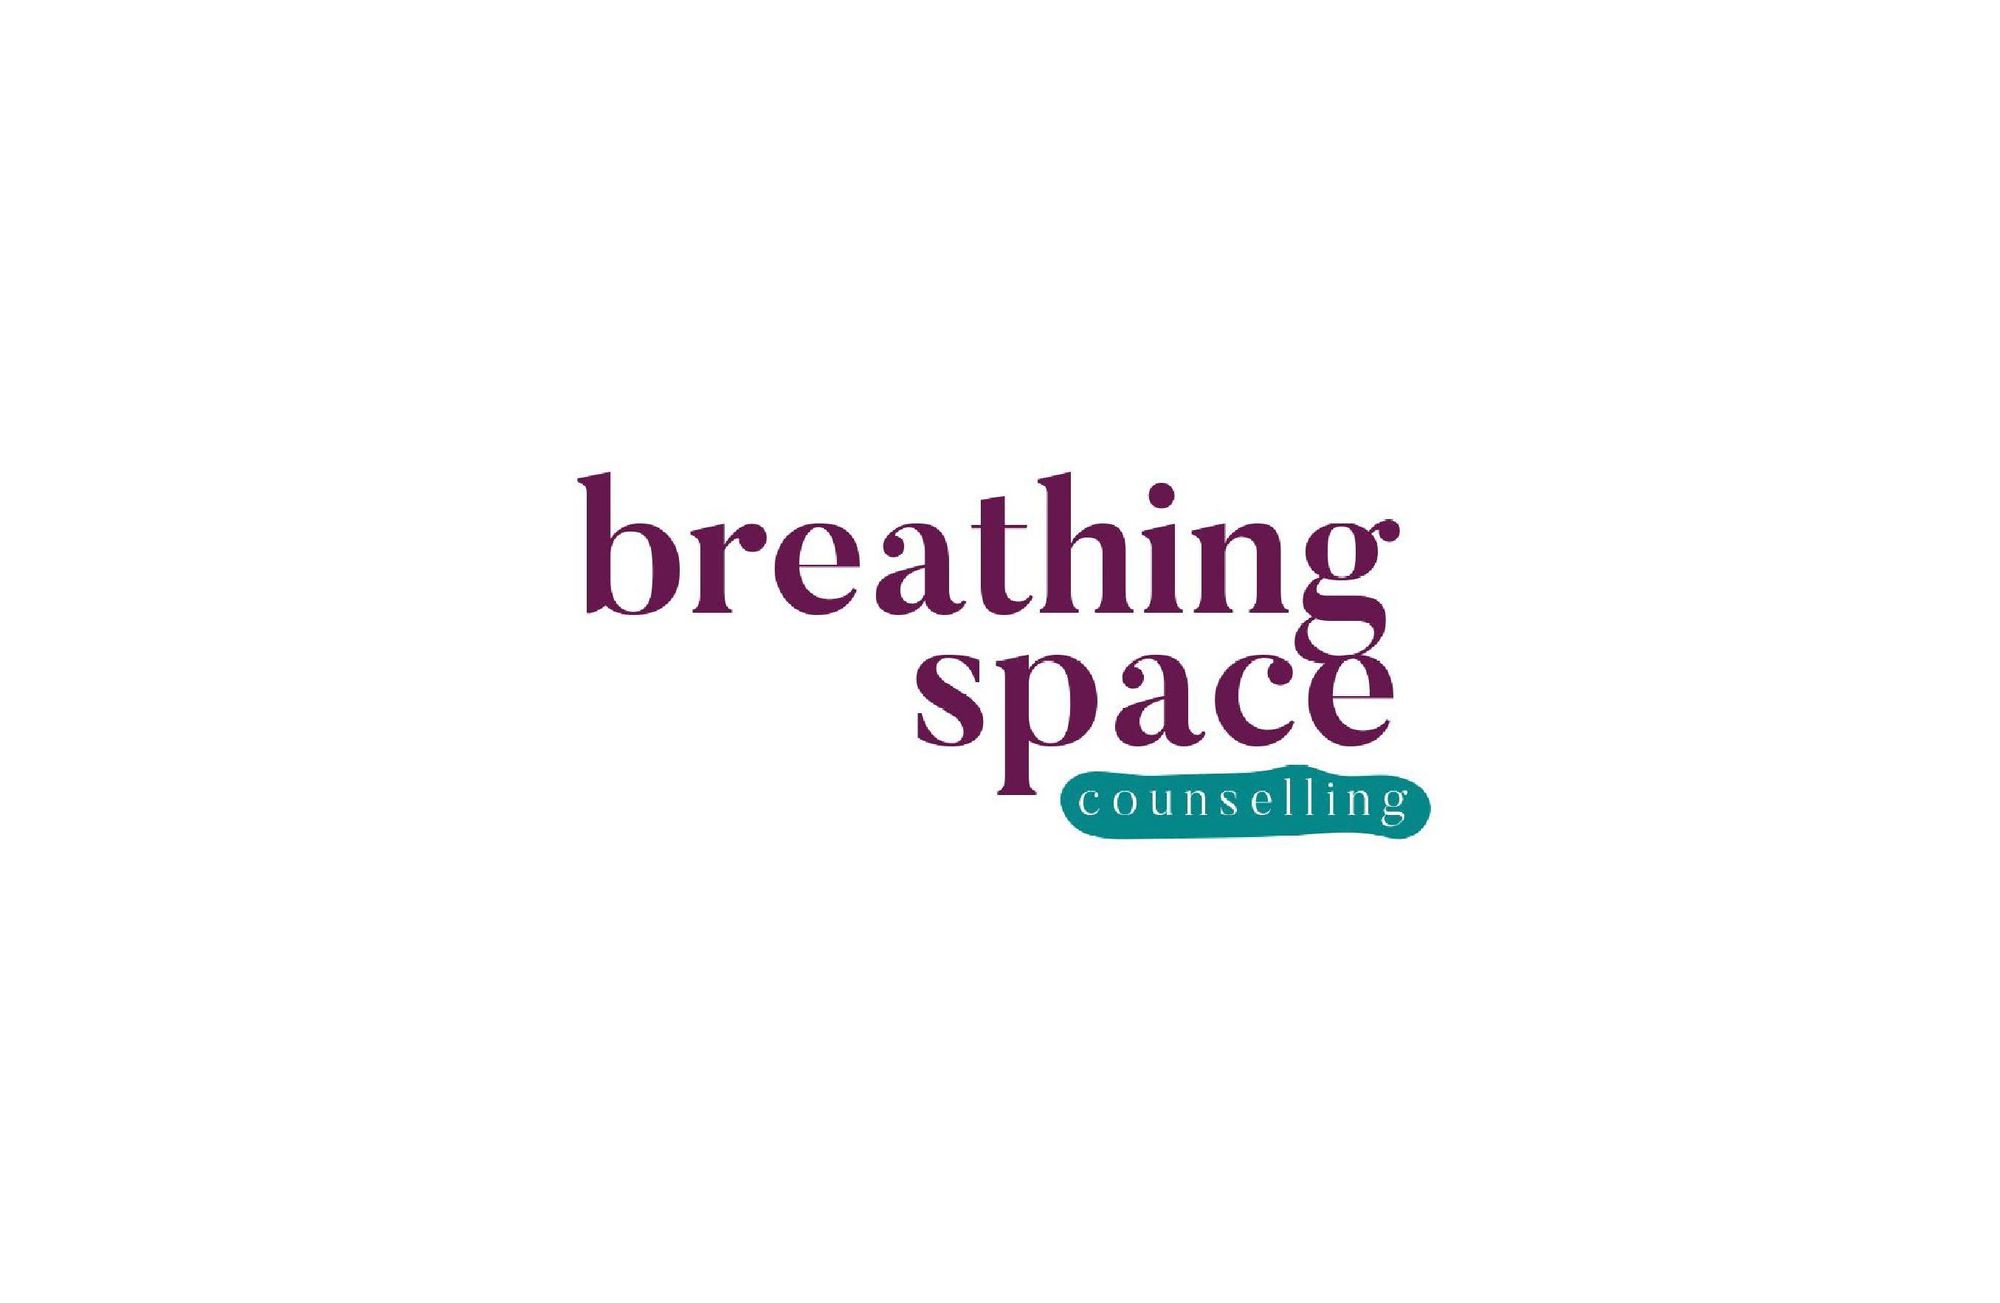 An Inclusive, Non-Judgmental Space - Breathing Space